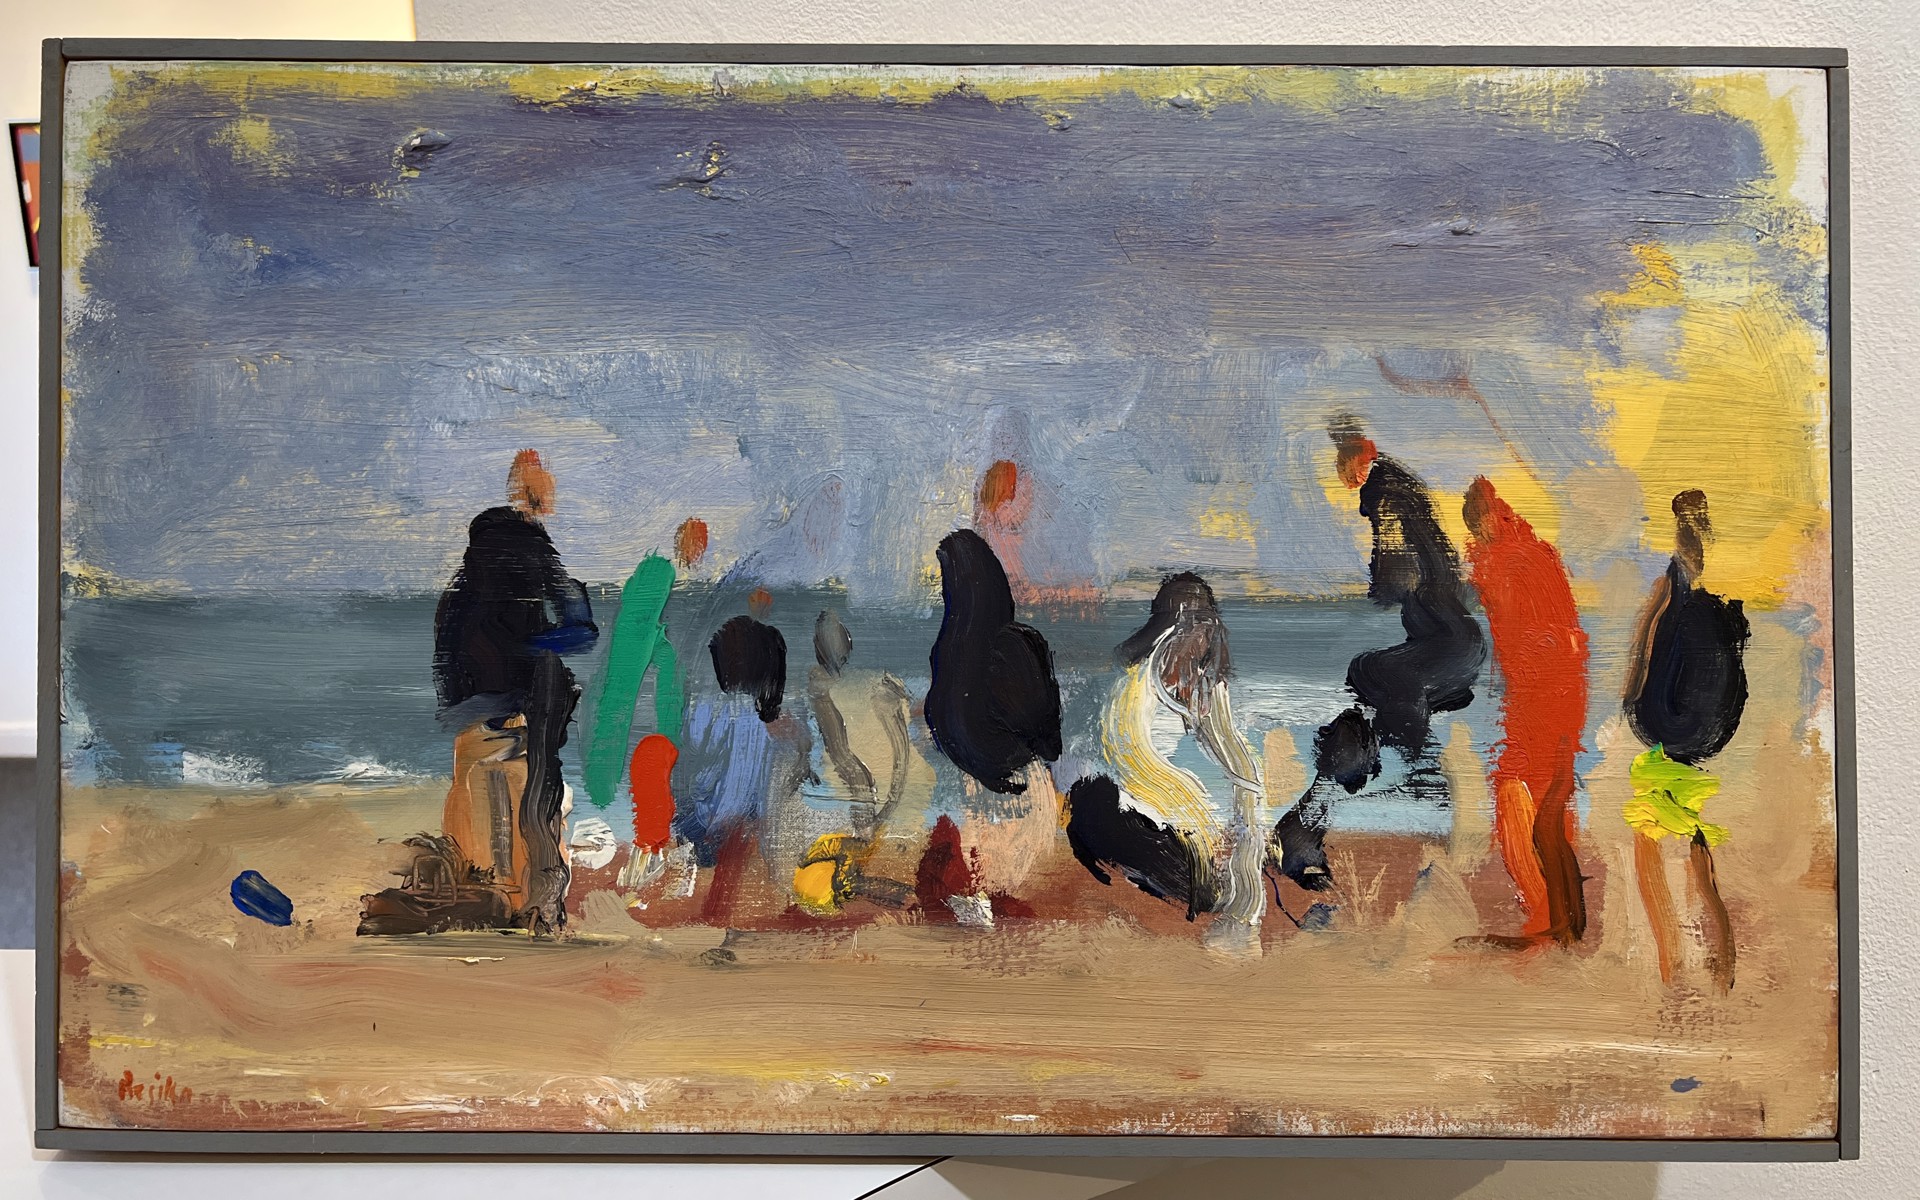 Figures on the Beach by Paul Resika